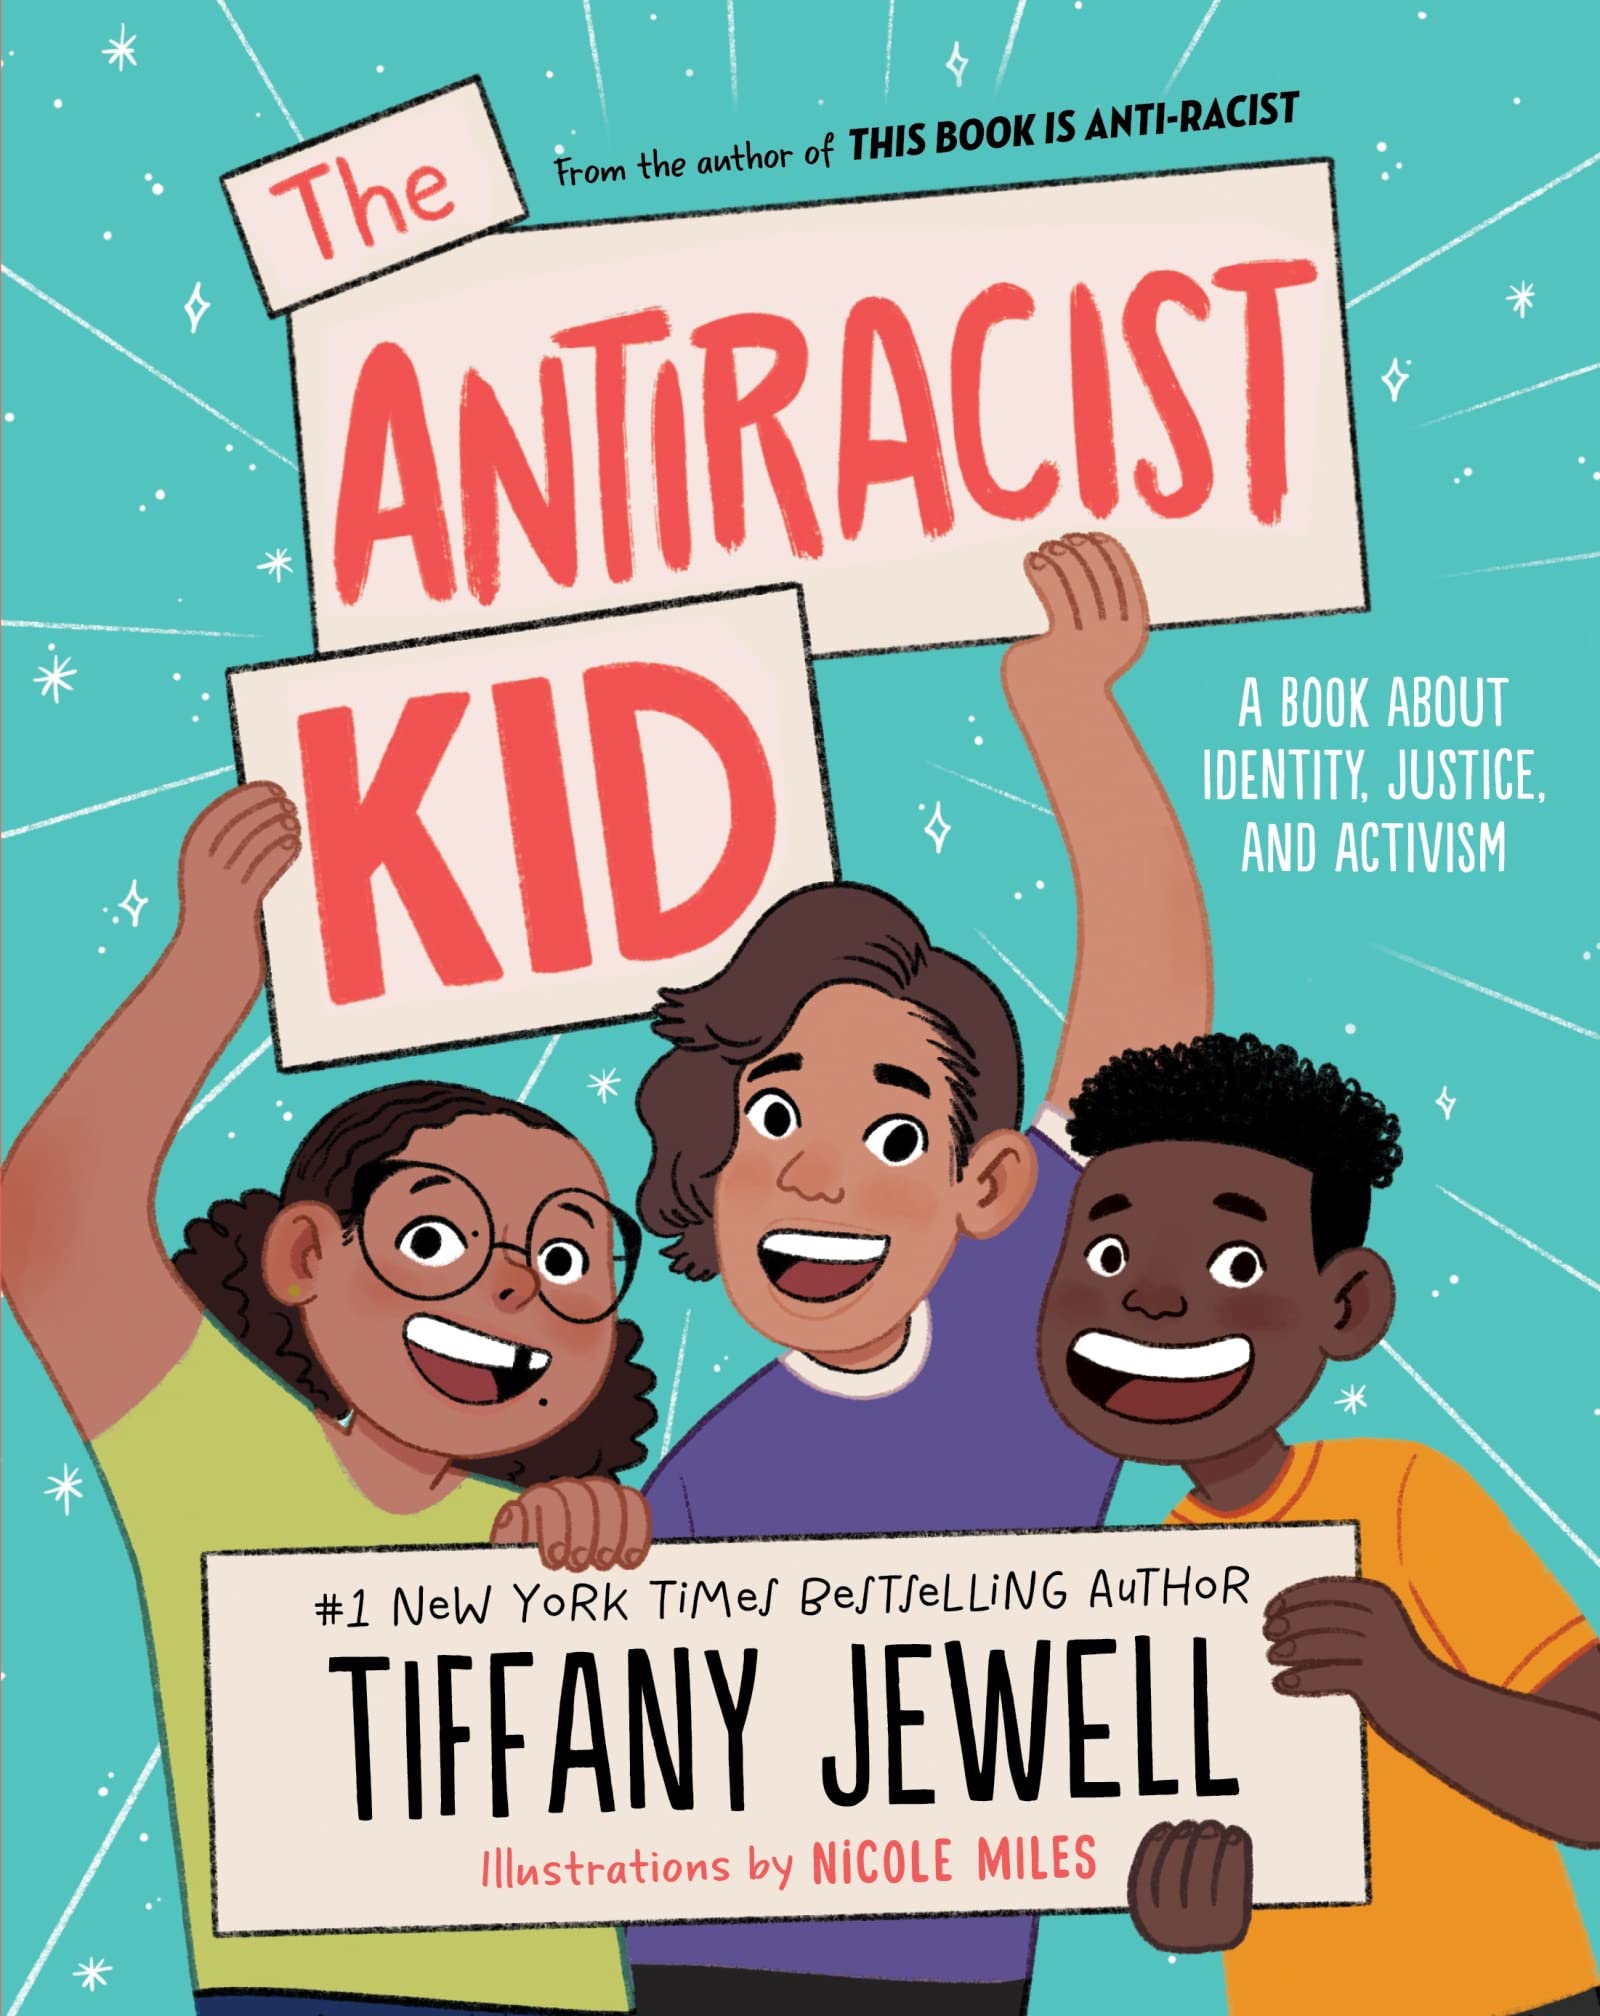 Book cover of The Antiracist Kid by Jewell